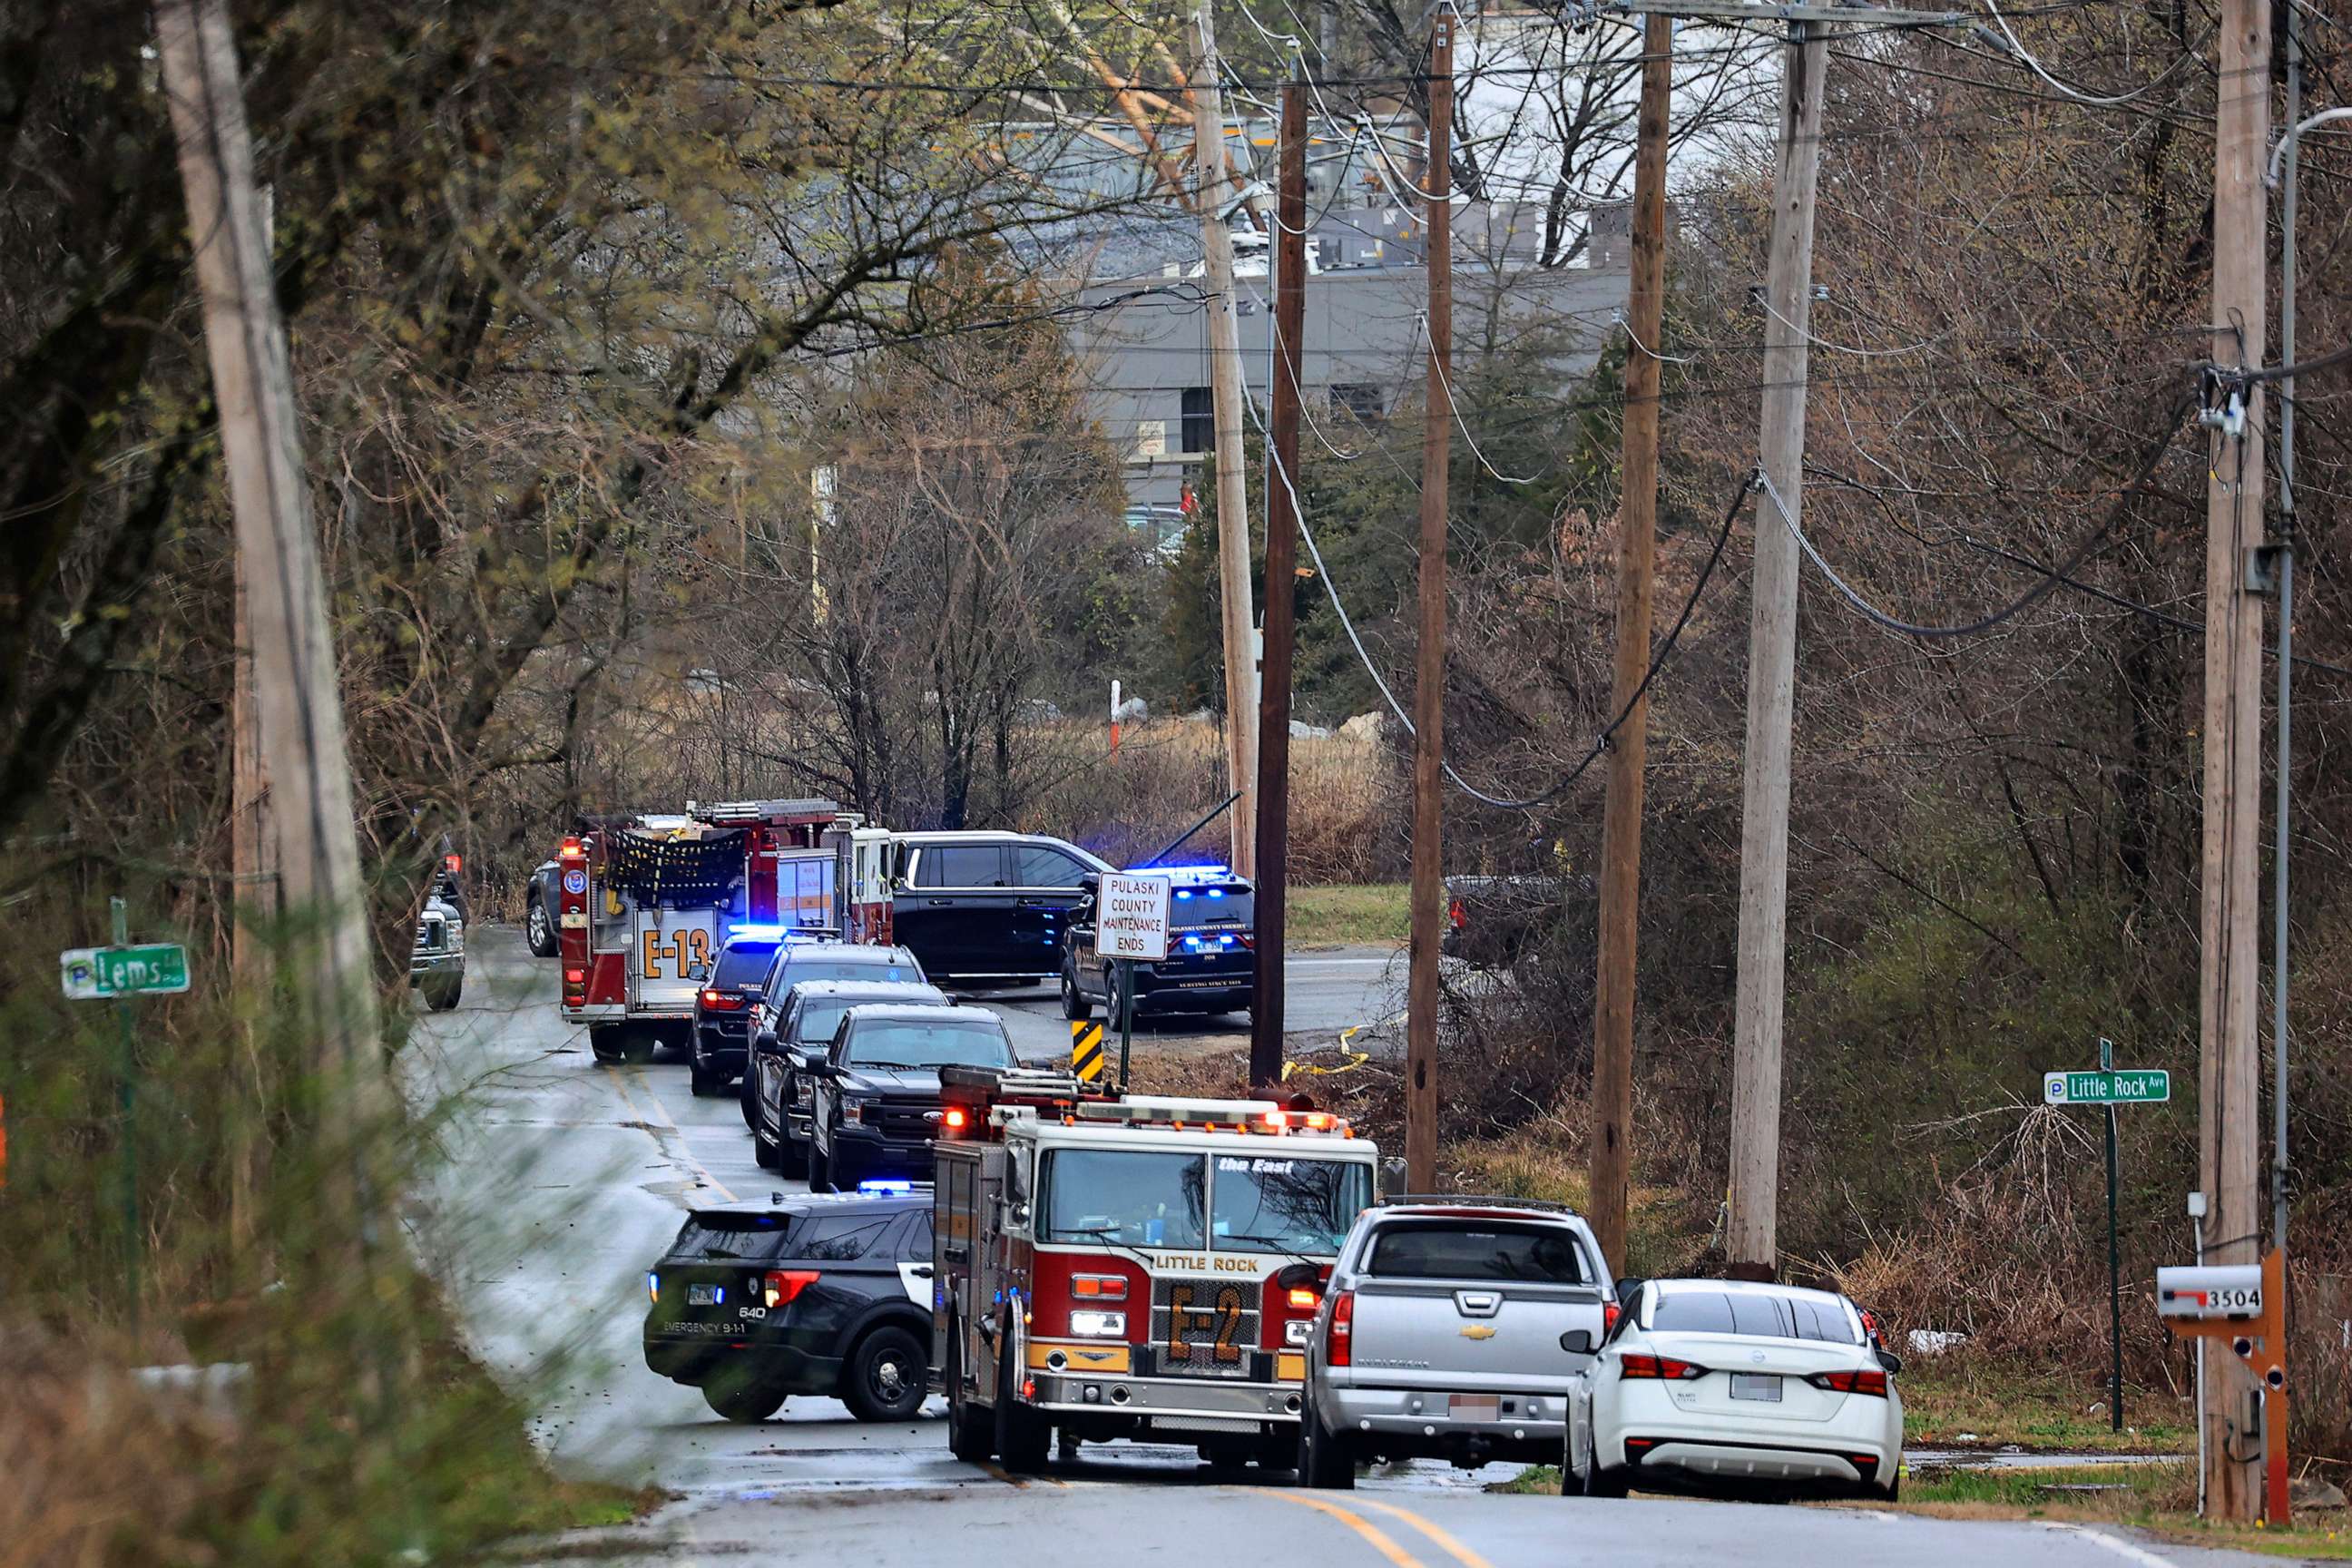 PHOTO: Emergency vehicles appear near the location where a small aircraft crashed while taking off from the Bill and Hillary Clinton National Airport in Little Rock, Ark., Feb. 22, 2023.